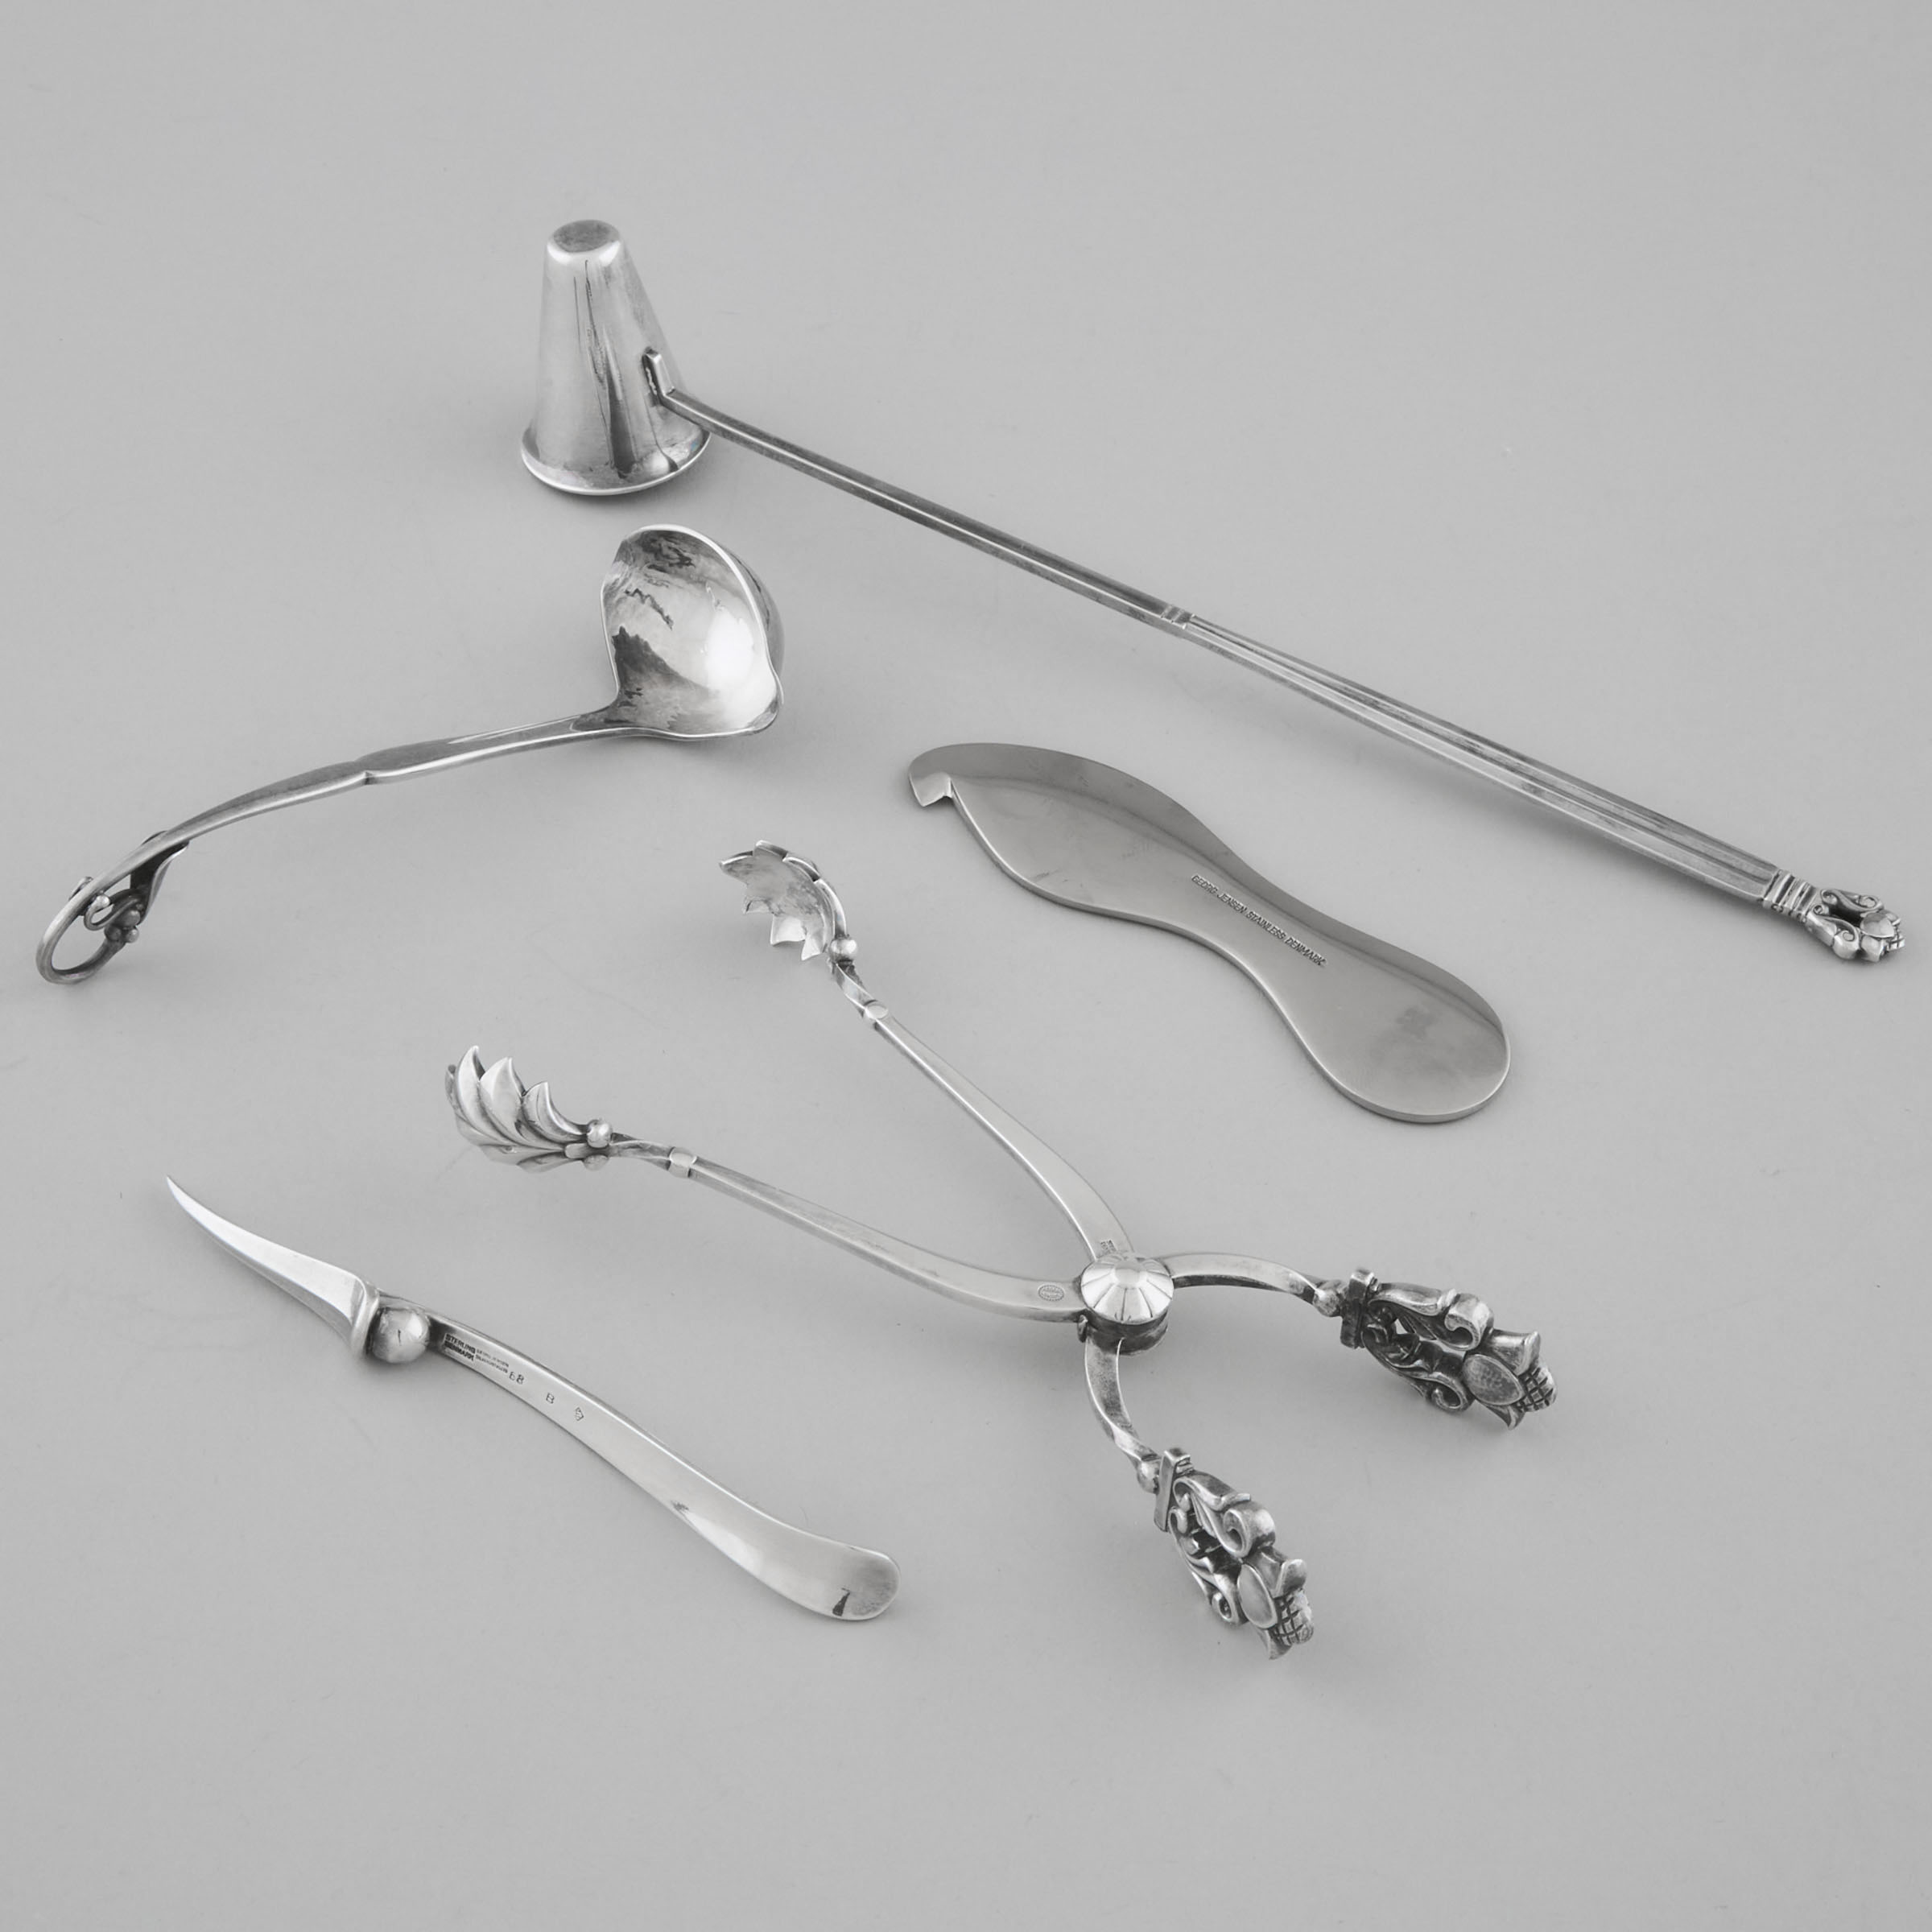 Danish Silver 'Acorn' Pattern Ice Tongs and a Candle Snuffer, #372, Johan Rohde, a Nut Pick, #68B, and Sauce Ladle, #21, Georg Jensen, Copenhagen, 20th century